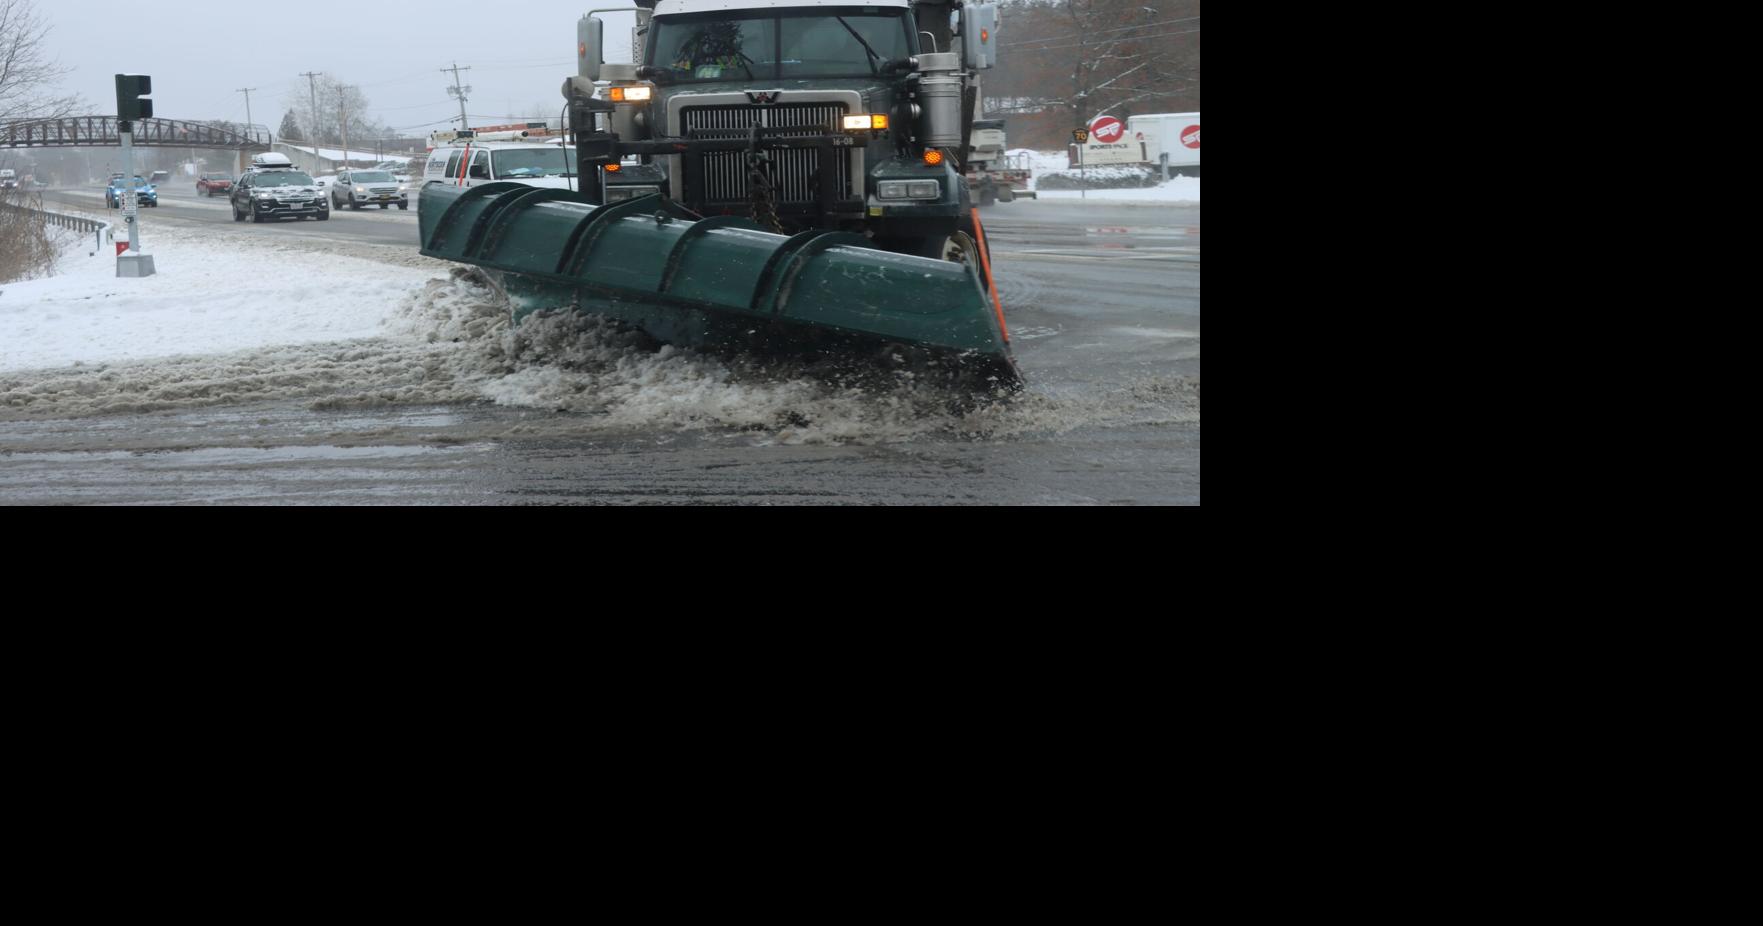 Upstate New York snow removal gets a boost from new tech